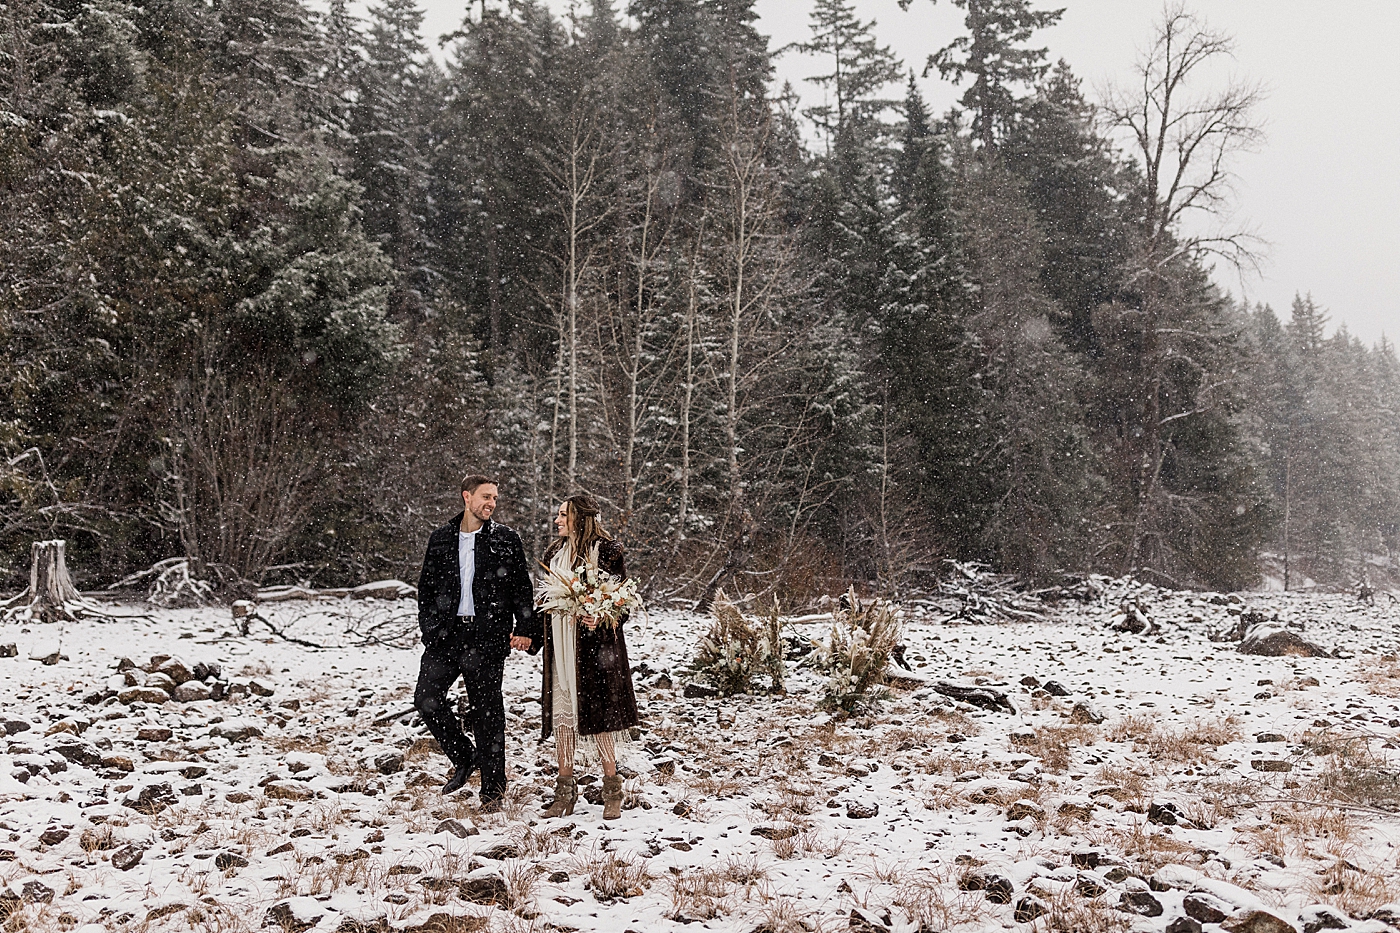 PNW Winter Elopement at Lake Kachess in the snow. Photos by Elopement Photographer, Megan Montalvo Photography